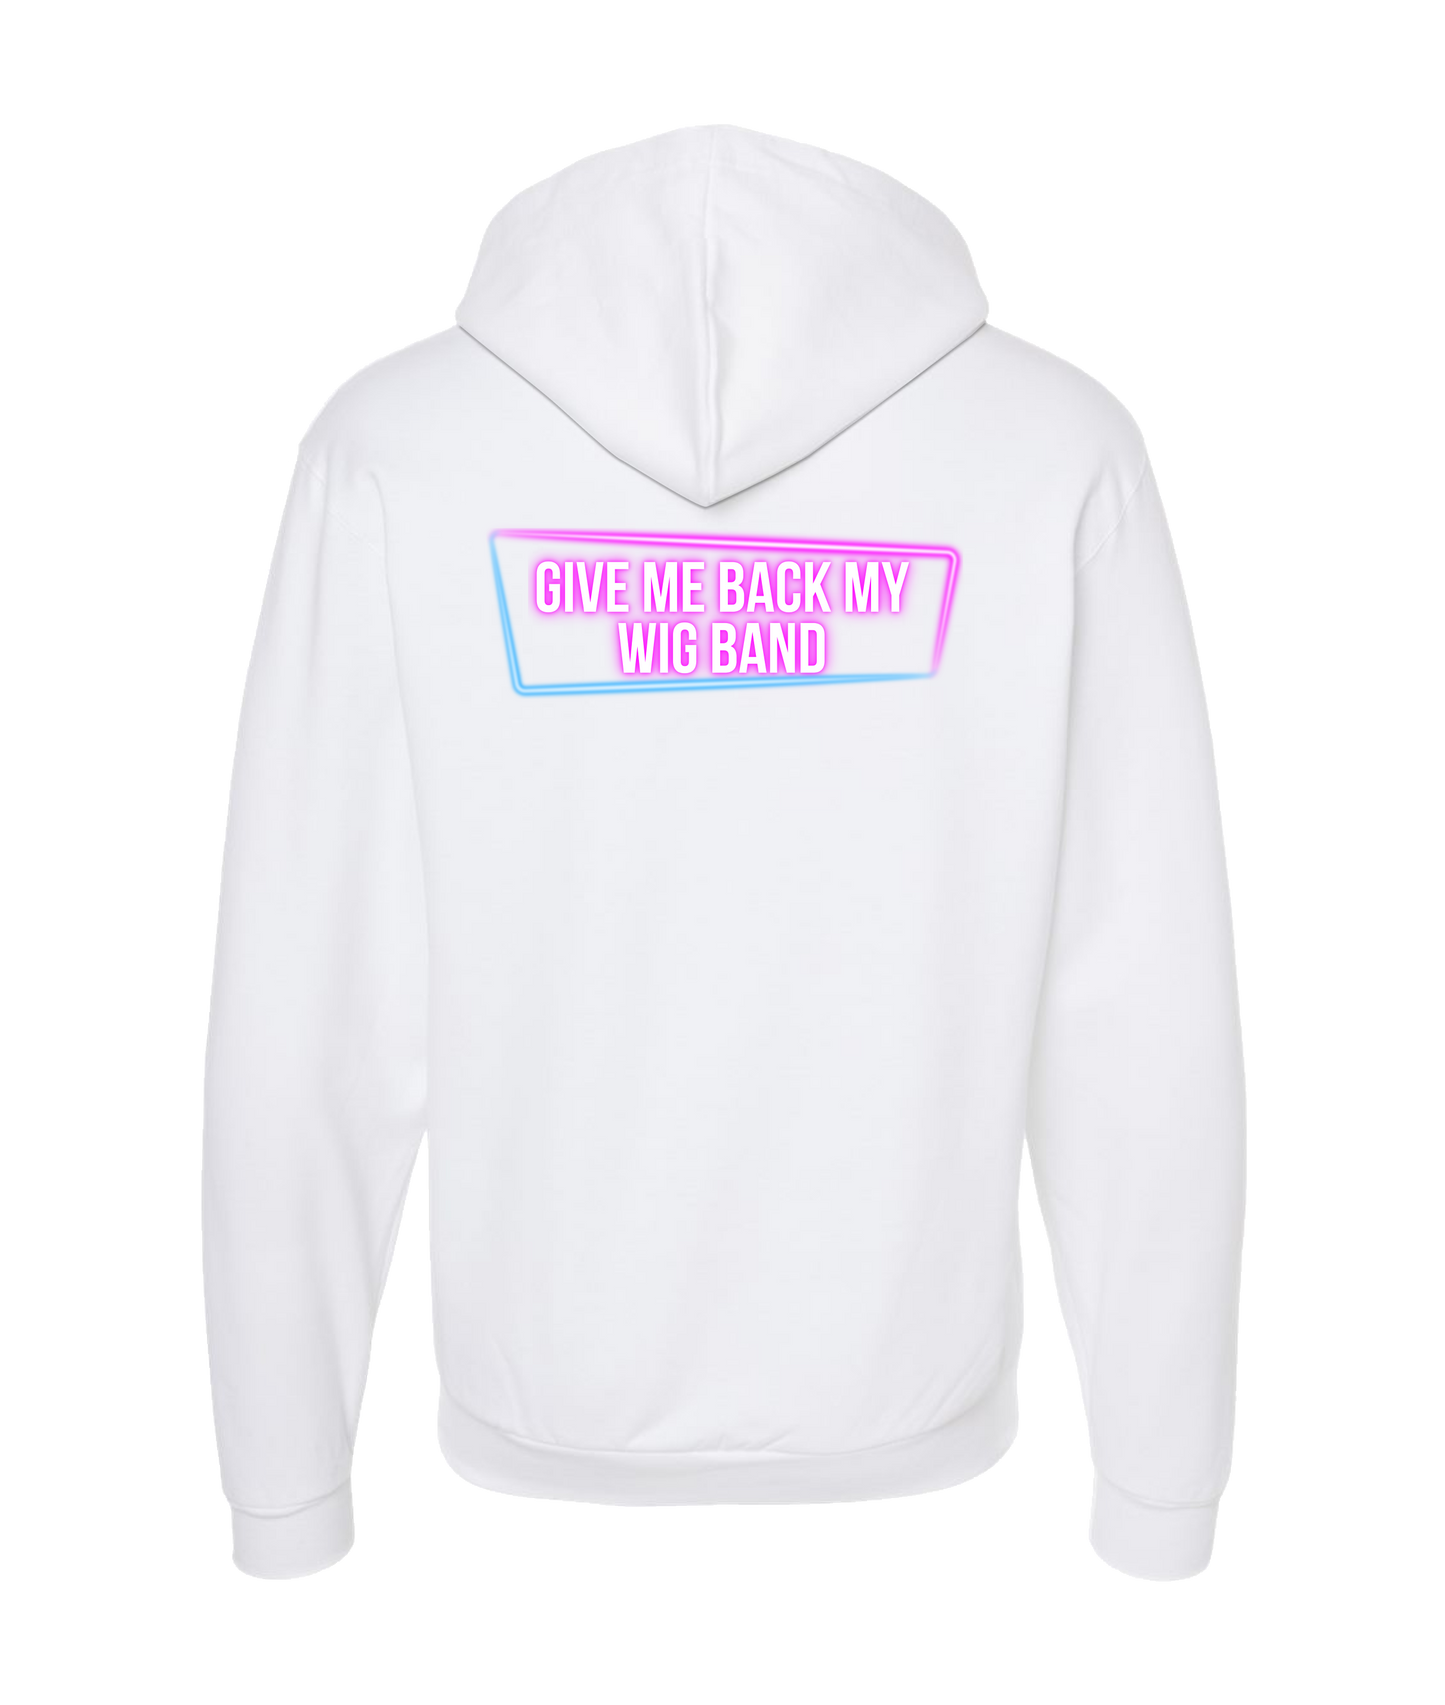 Give Me Back My Wig - Nion - White Zip Up Hoodie